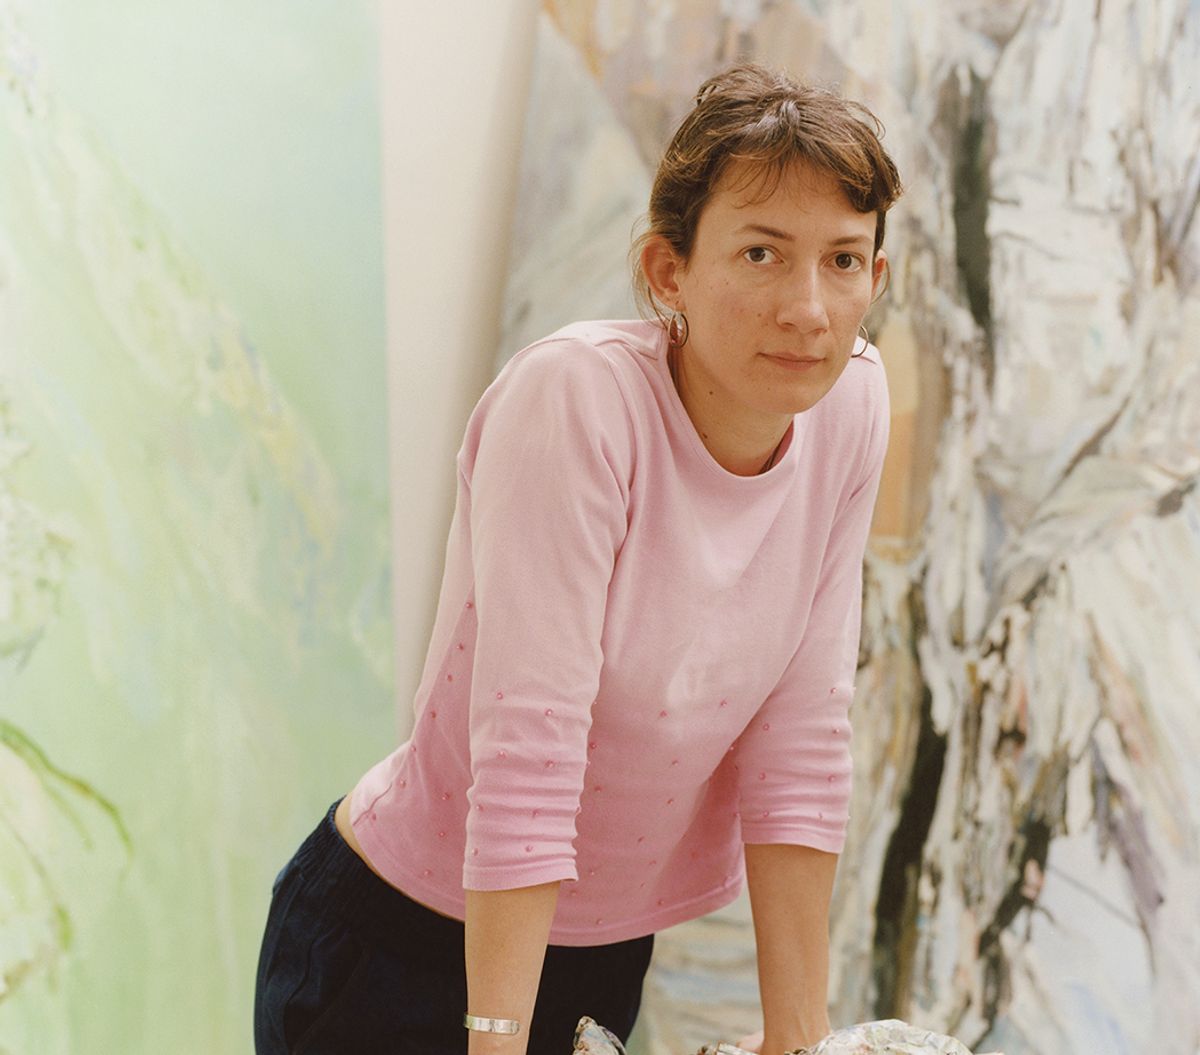 Mollett often spends months tweaking and adding to her works before they are finished: “It’s almost like I am painting the painting itself emerging,” she says
Photo: Hannah Burton